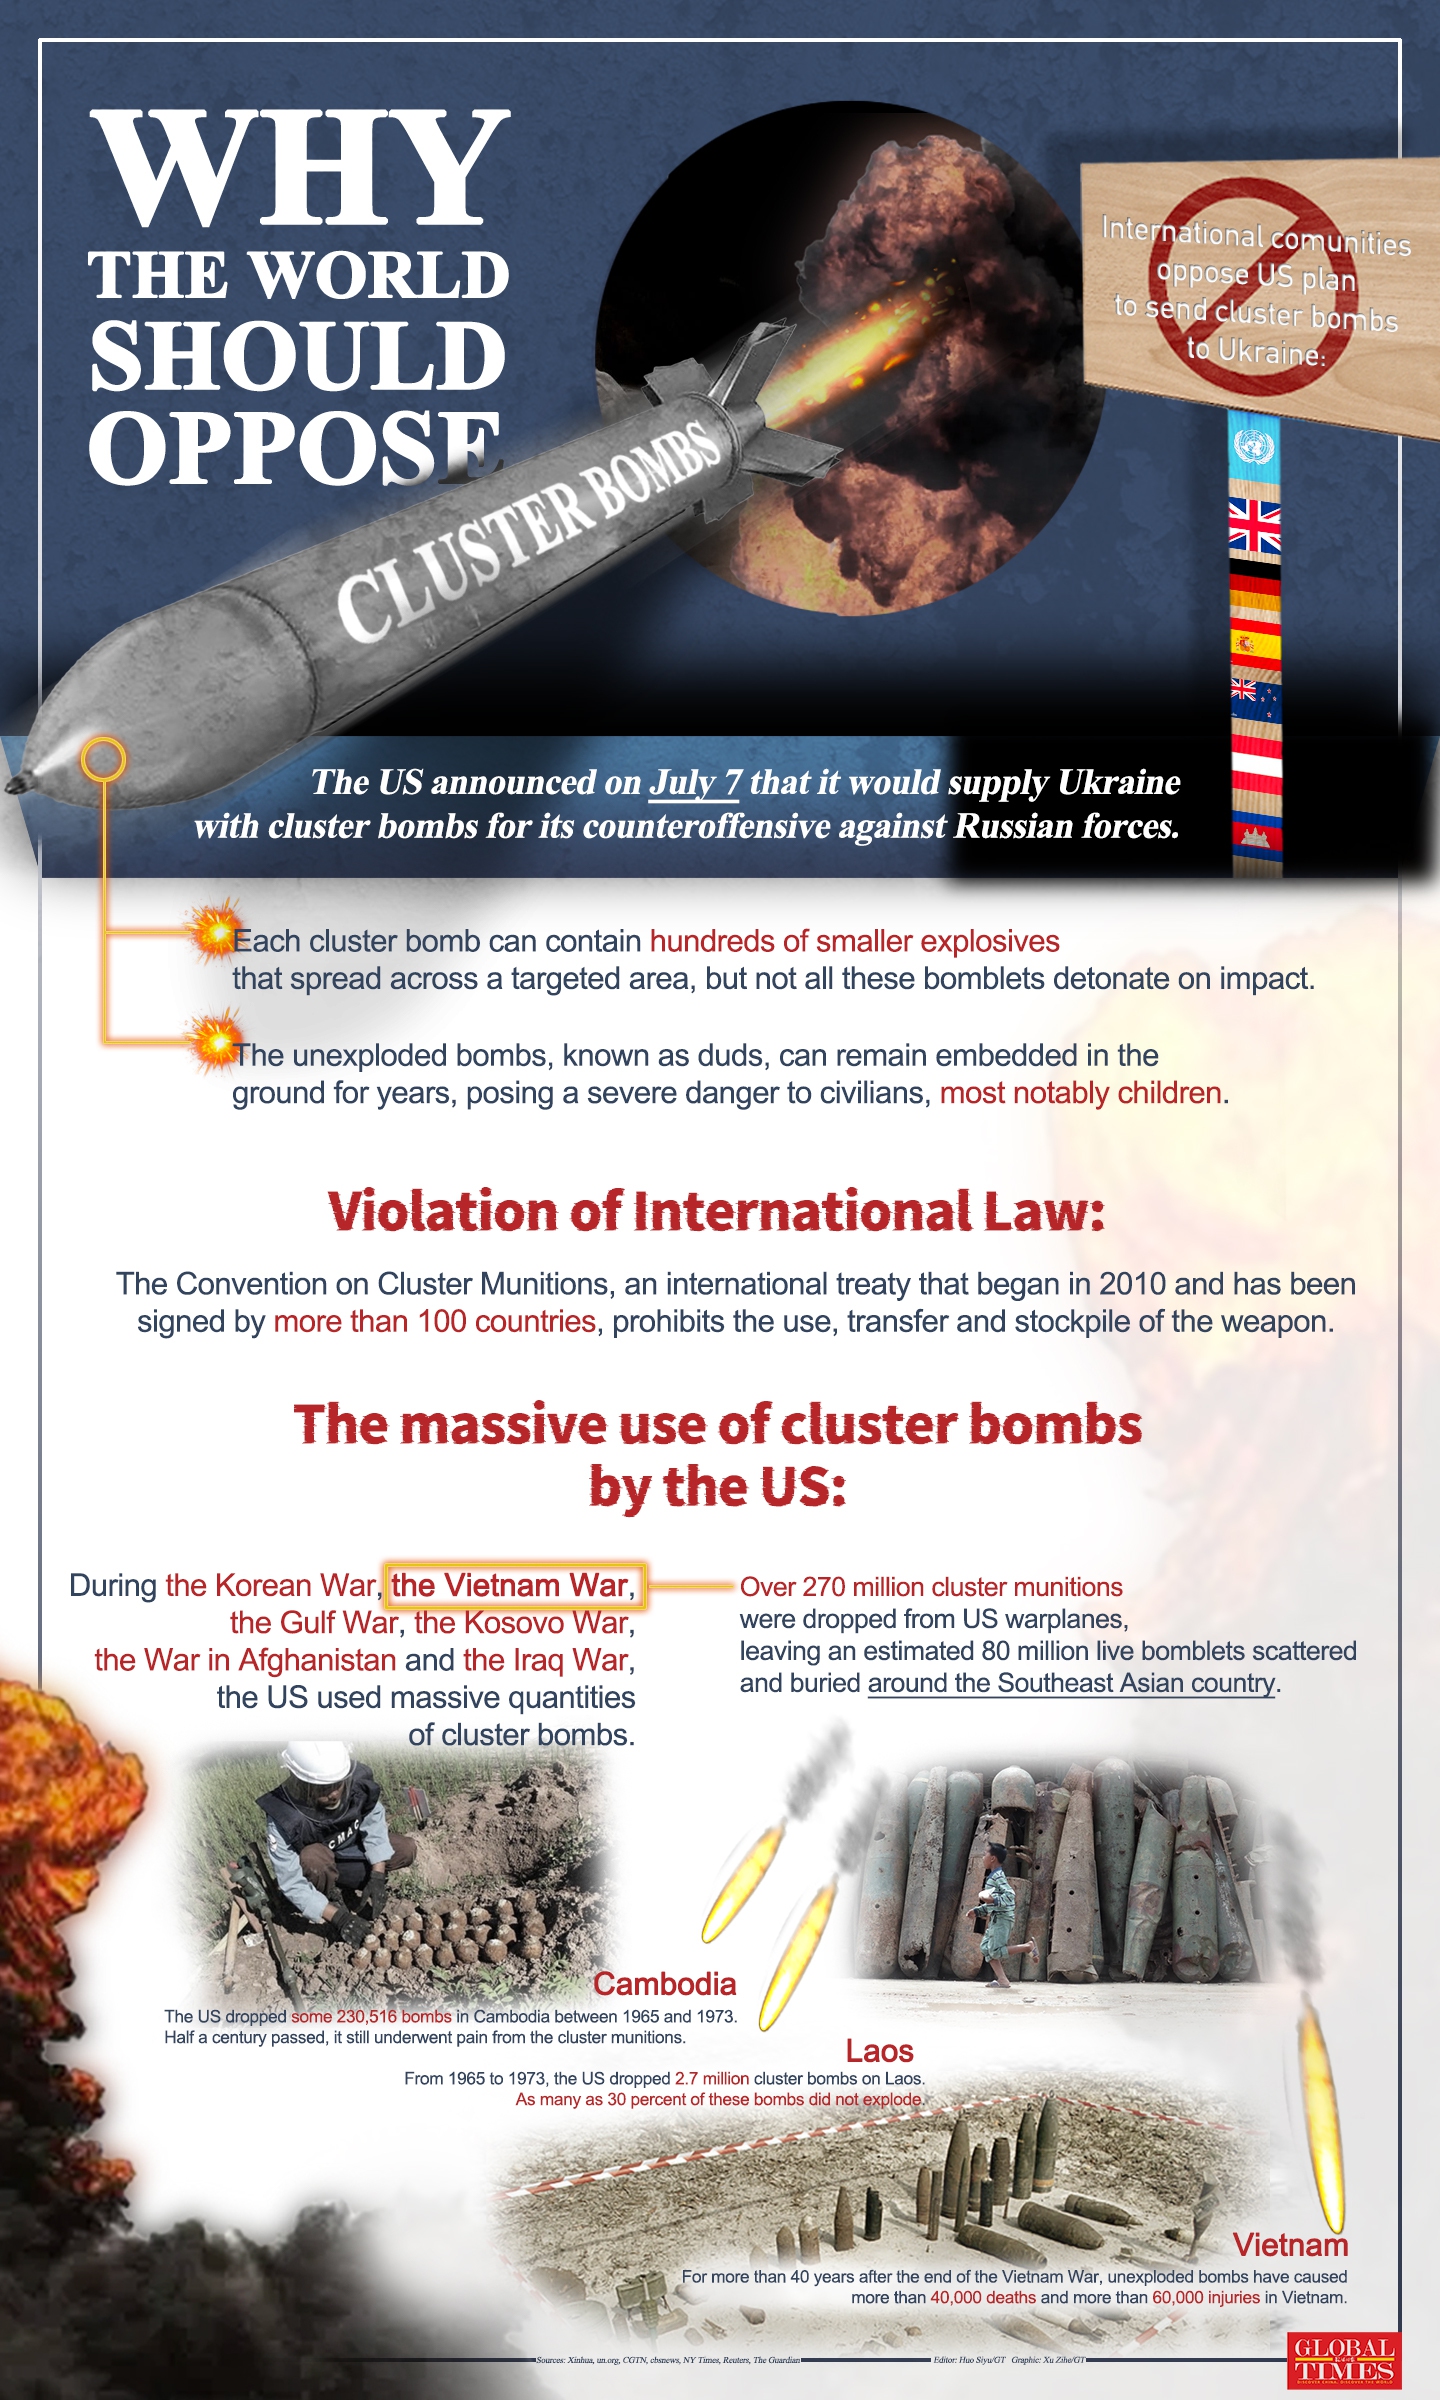 Why the world should oppose cluster munitions